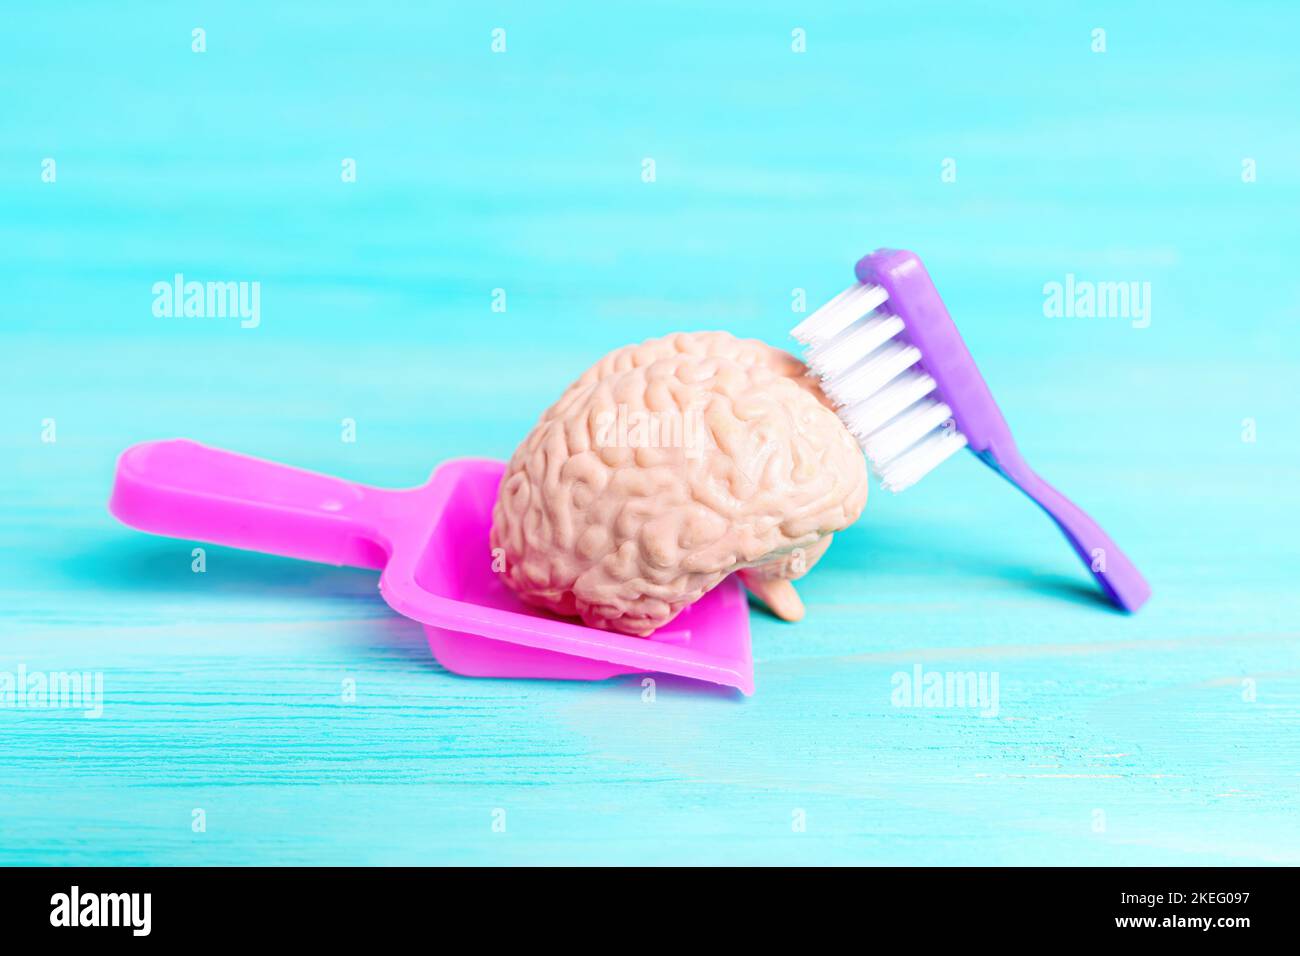 Cleaning human brain figurine placed on a toy dust pan with a scrub brush on blue background. Creative mind clearing concept. Stock Photo